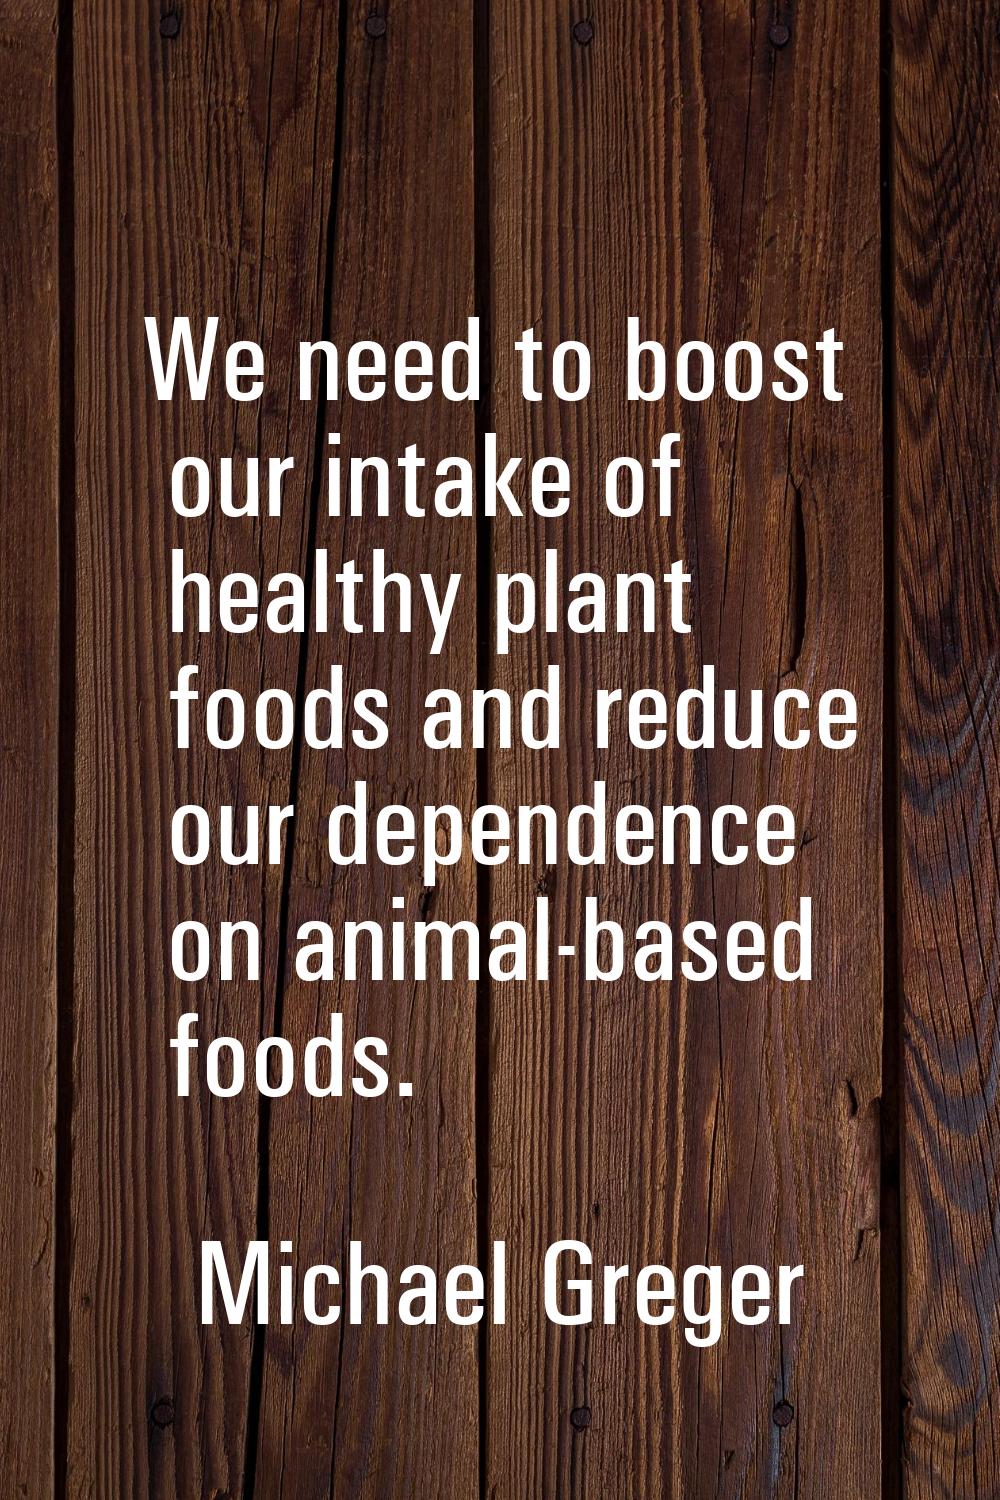 We need to boost our intake of healthy plant foods and reduce our dependence on animal-based foods.